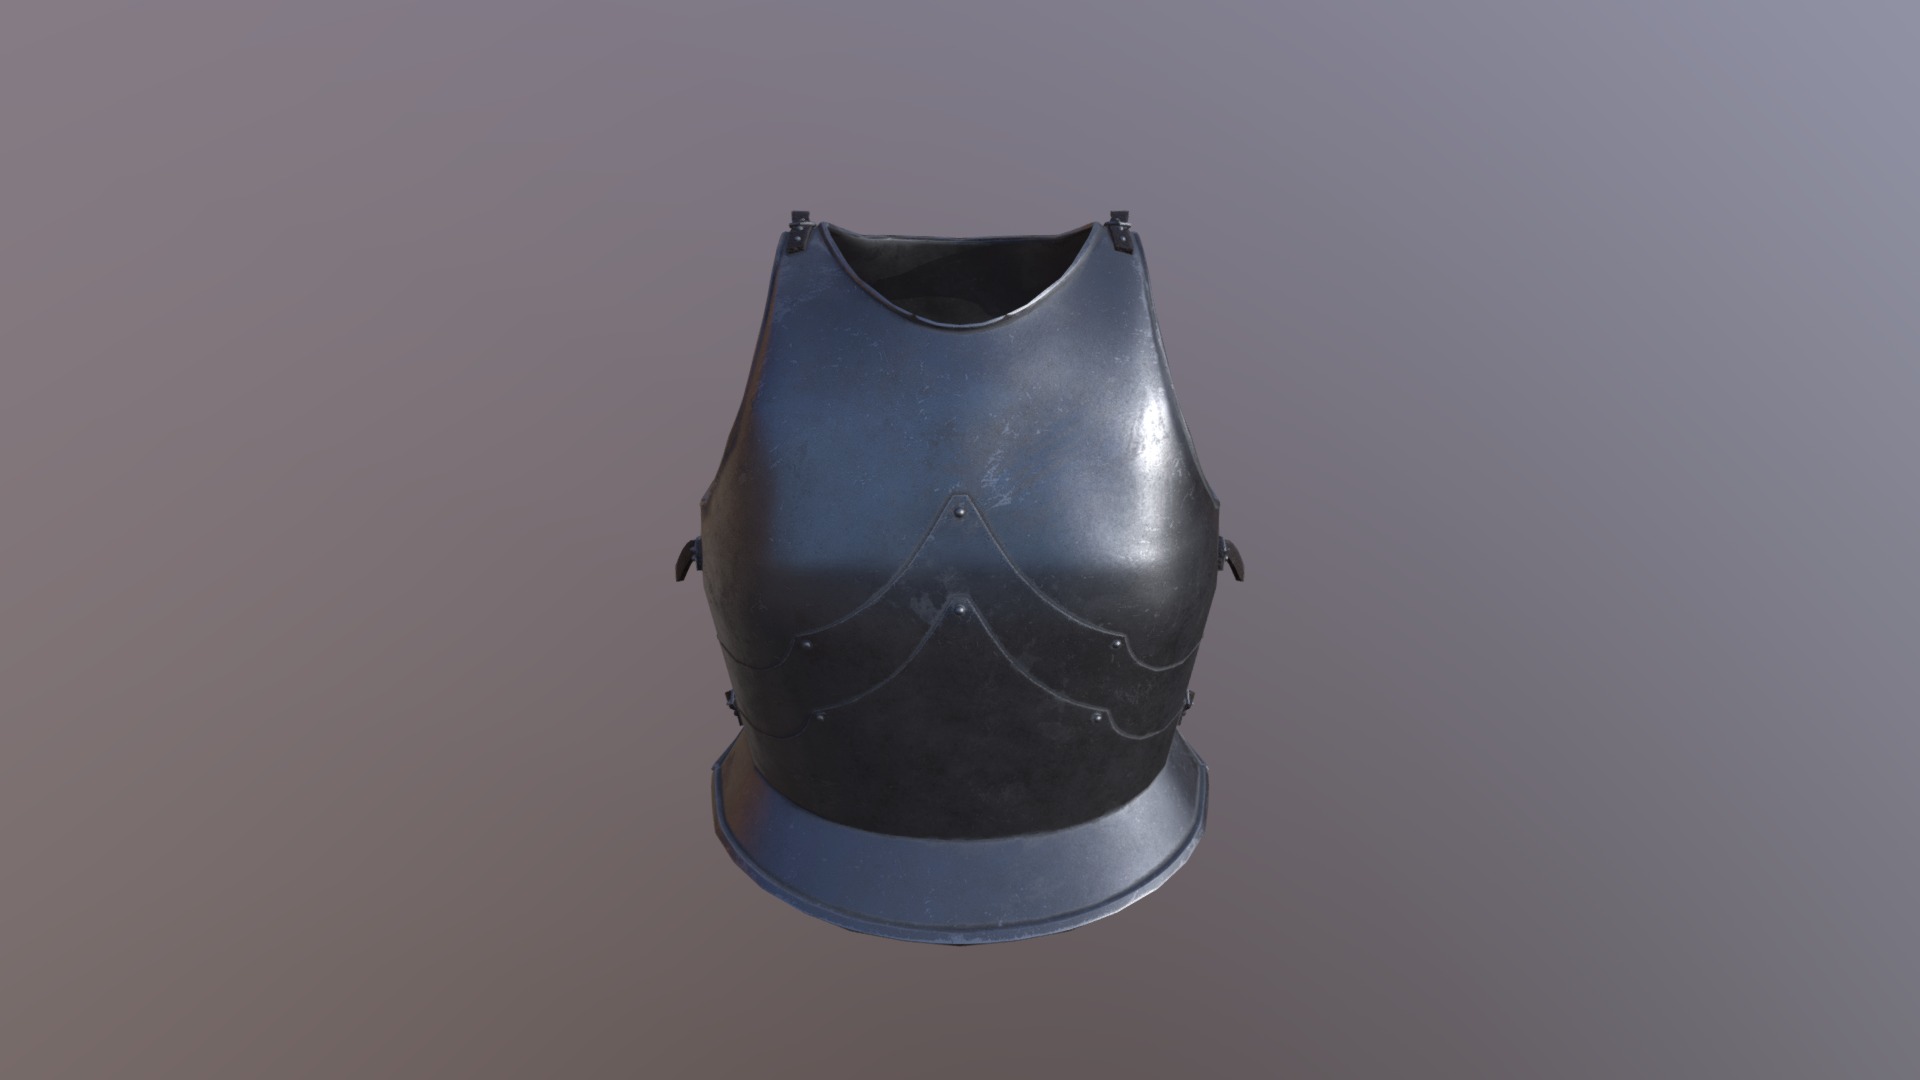 3D model Breastplate armour - This is a 3D model of the Breastplate armour. The 3D model is about a glass vase with a blue design.